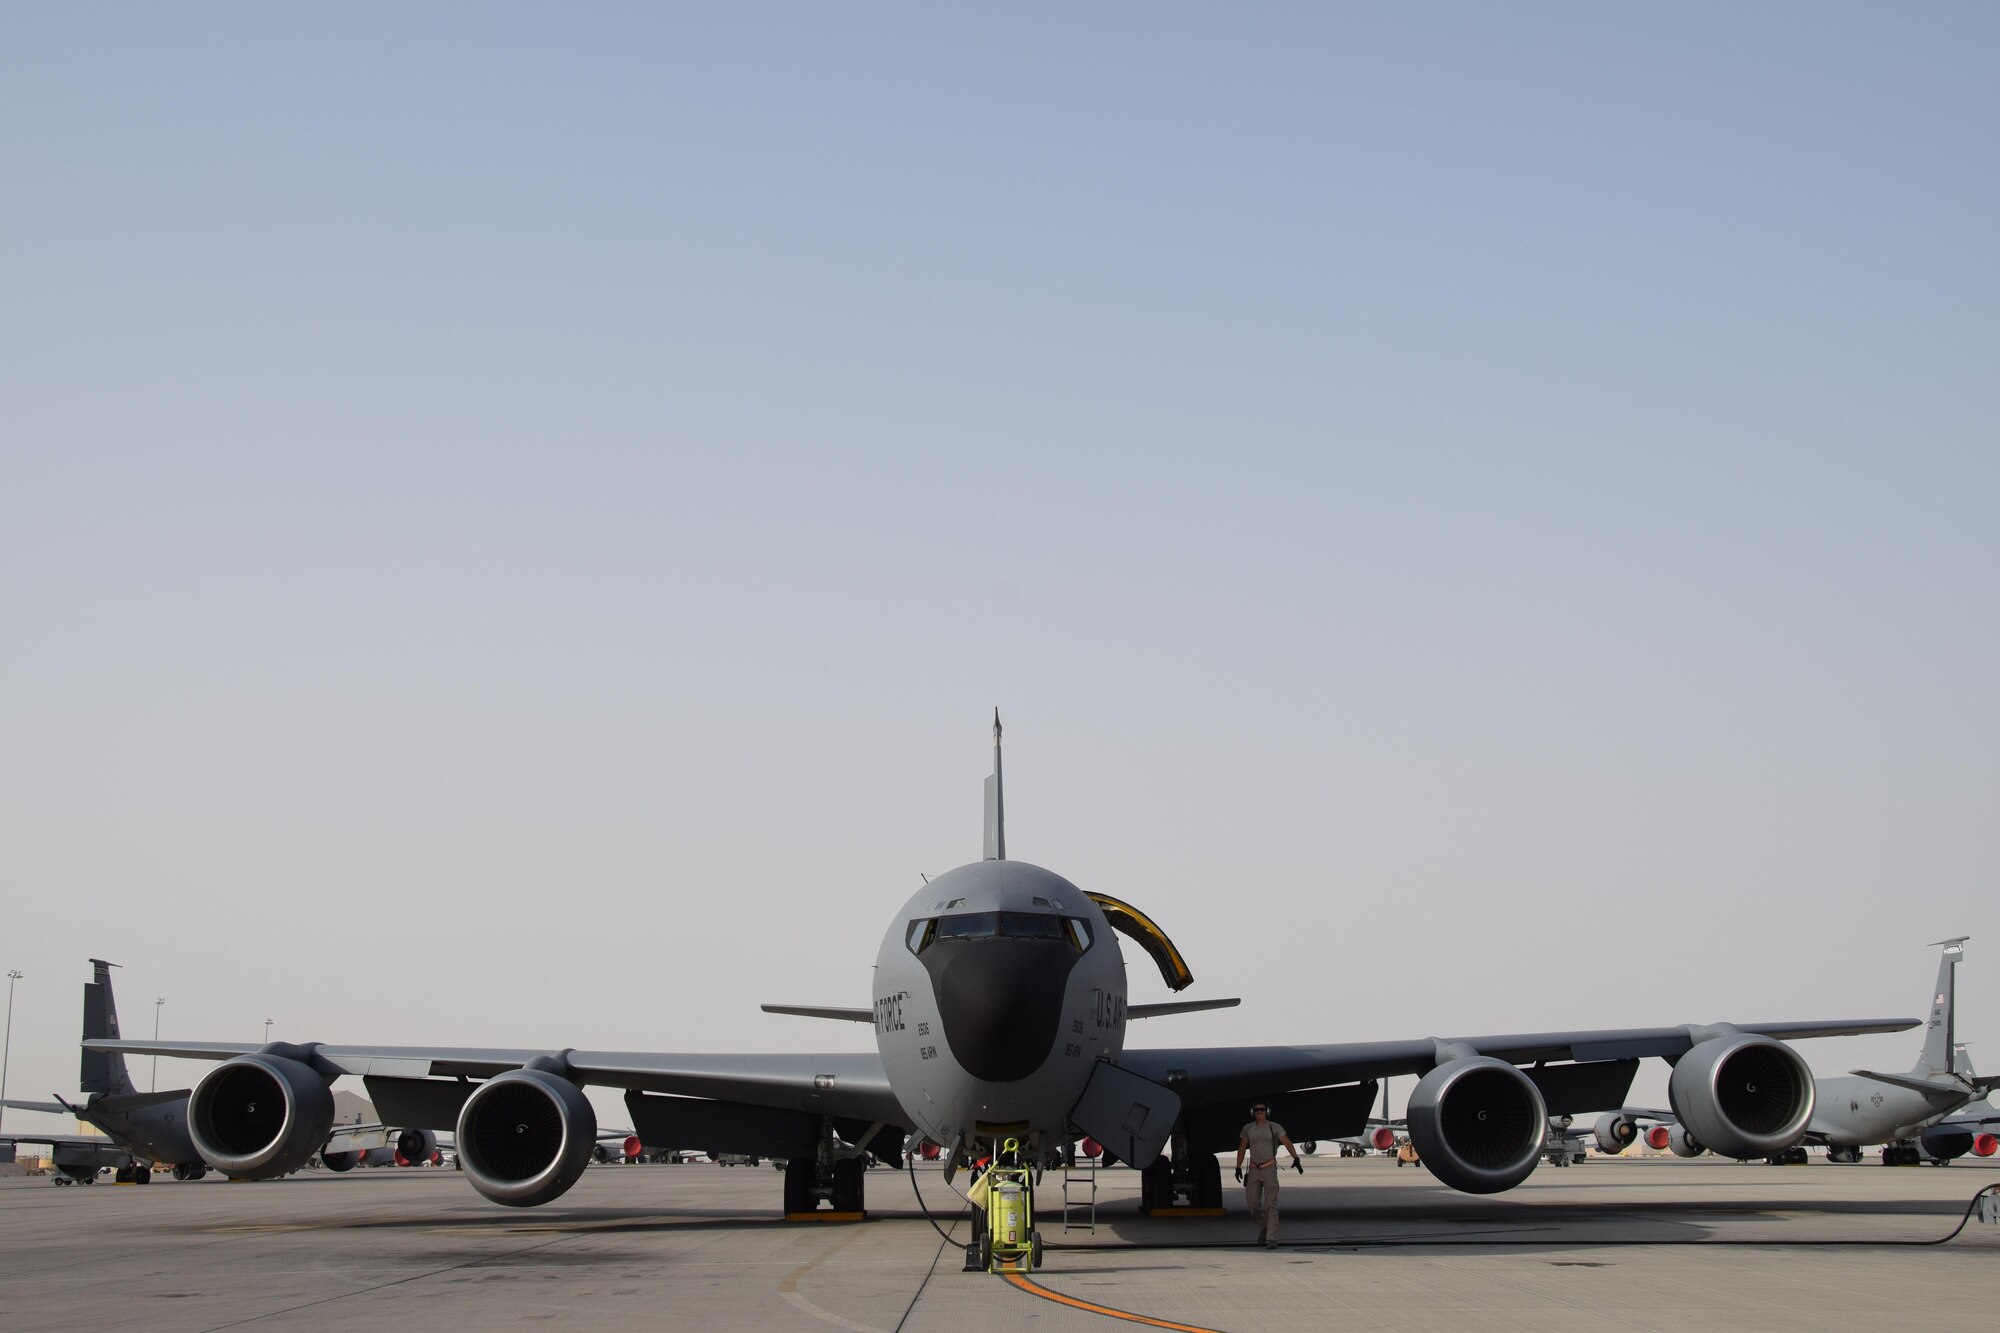 Staff Sgt. Ryan Feeney, 340th Expeditionary Aircraft Maintenance Unit crew chief, prepares a KC-135 Stratotanker for a mission June 1, 2016, at Al Udeid Air Base, Qatar. Airmen from the 340th AMU work together to prepare more than 30 KC-135s for daily in-air refueling missions round the clock. Feeney is attached to the 379th Air Expeditionary Wing and hails from Bangor Air National Guard Base, Maine. (U.S. Air Force photo by Technical Sgt. Carlos J. Trevino/Released)